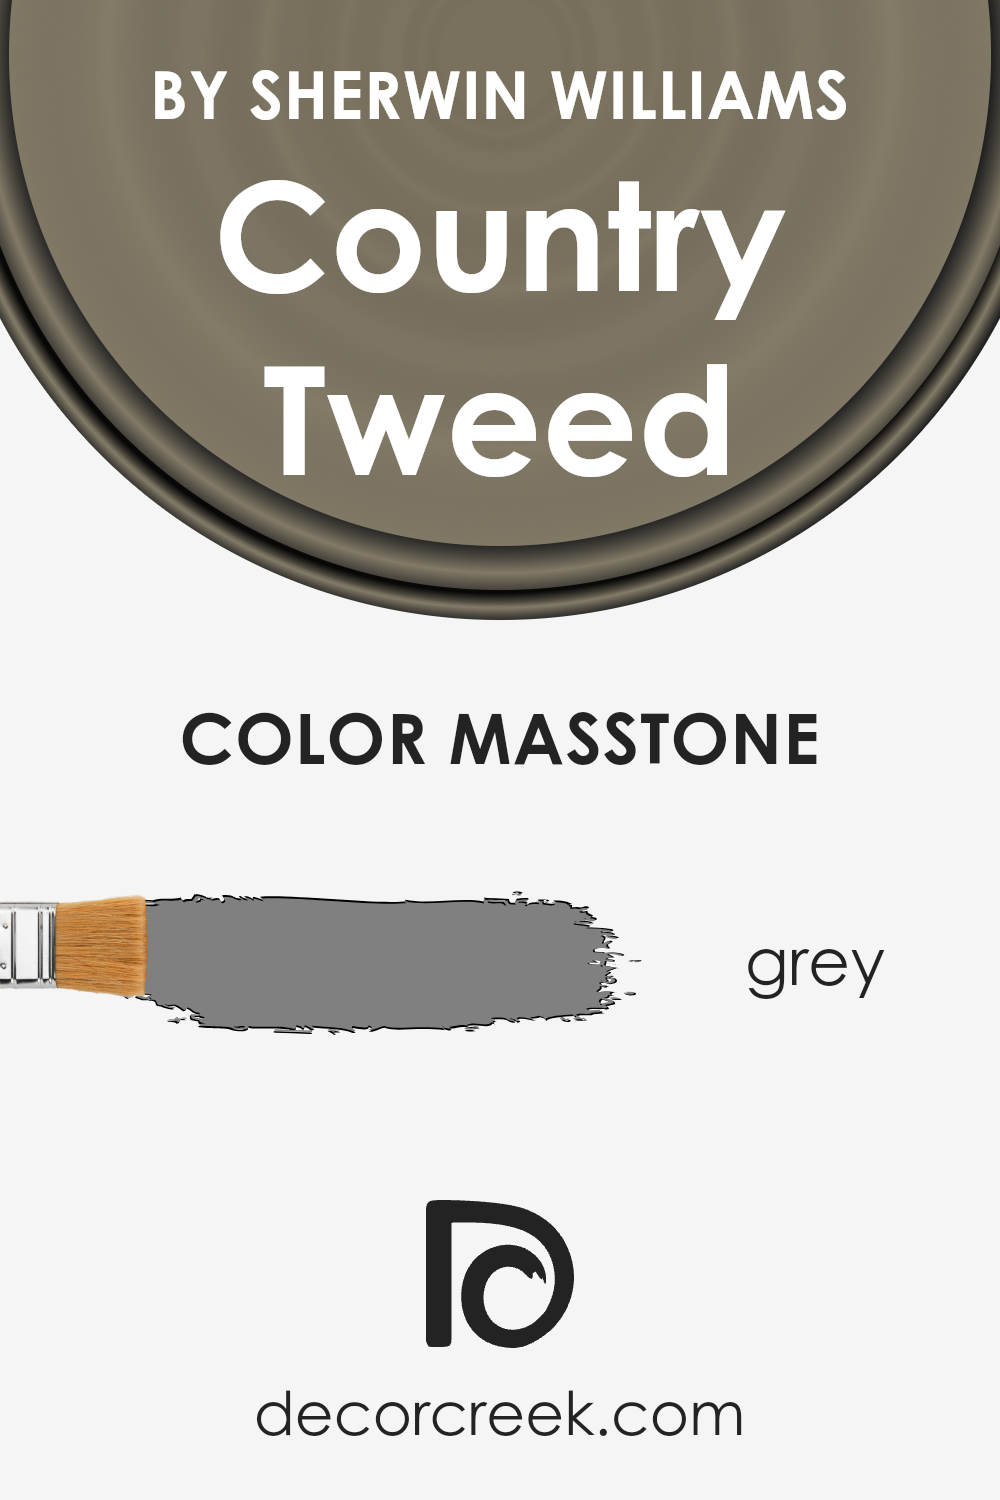 what_is_the_masstone_of_country_tweed_sw_9519